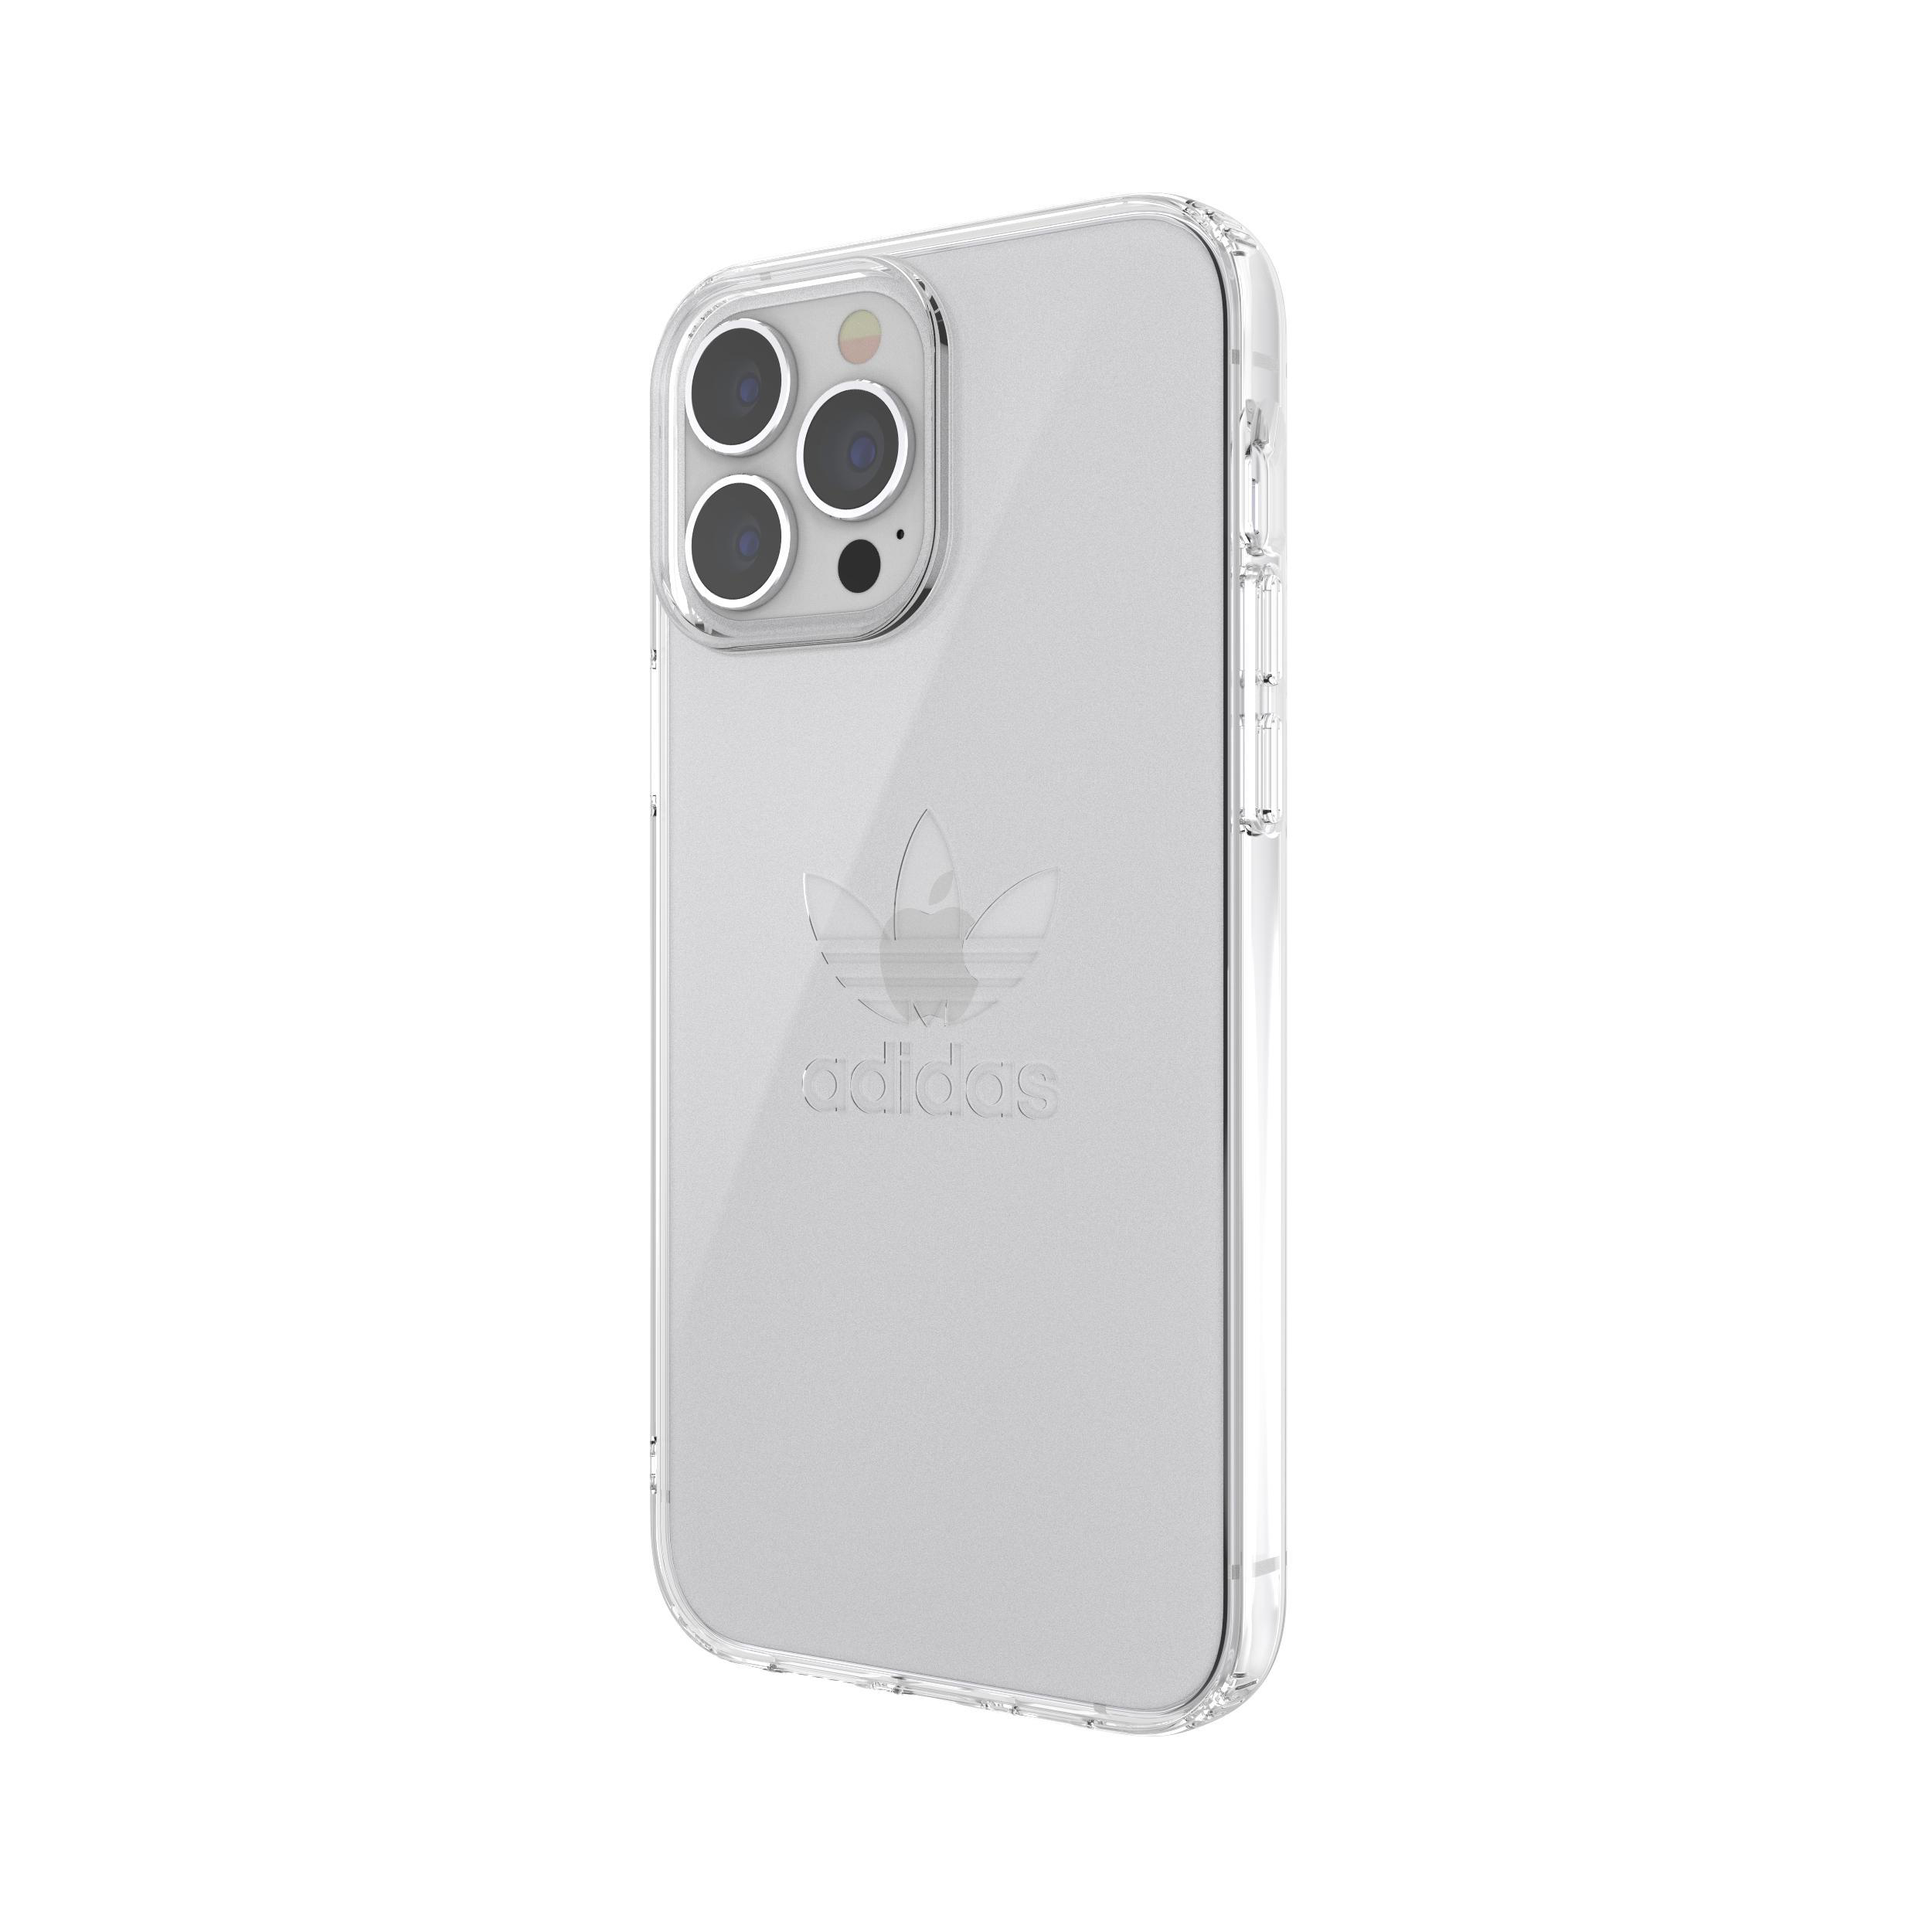 ORIGINALS Pro 13 Max, Apple, Backcover, ADIDAS Clear, Protective Transparent iPhone